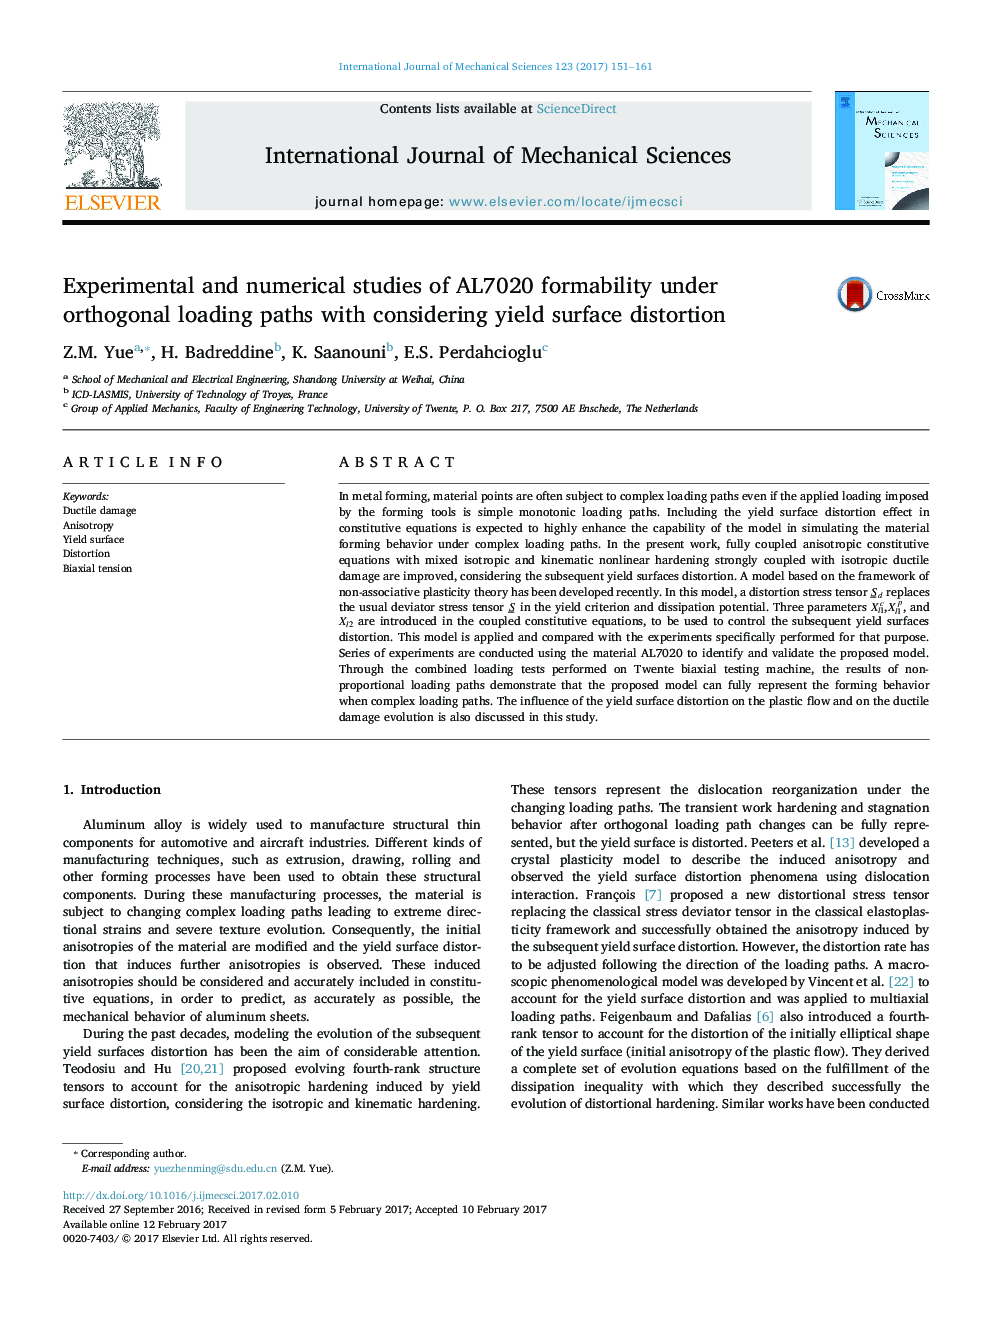 Experimental and numerical studies of AL7020 formability under orthogonal loading paths with considering yield surface distortion